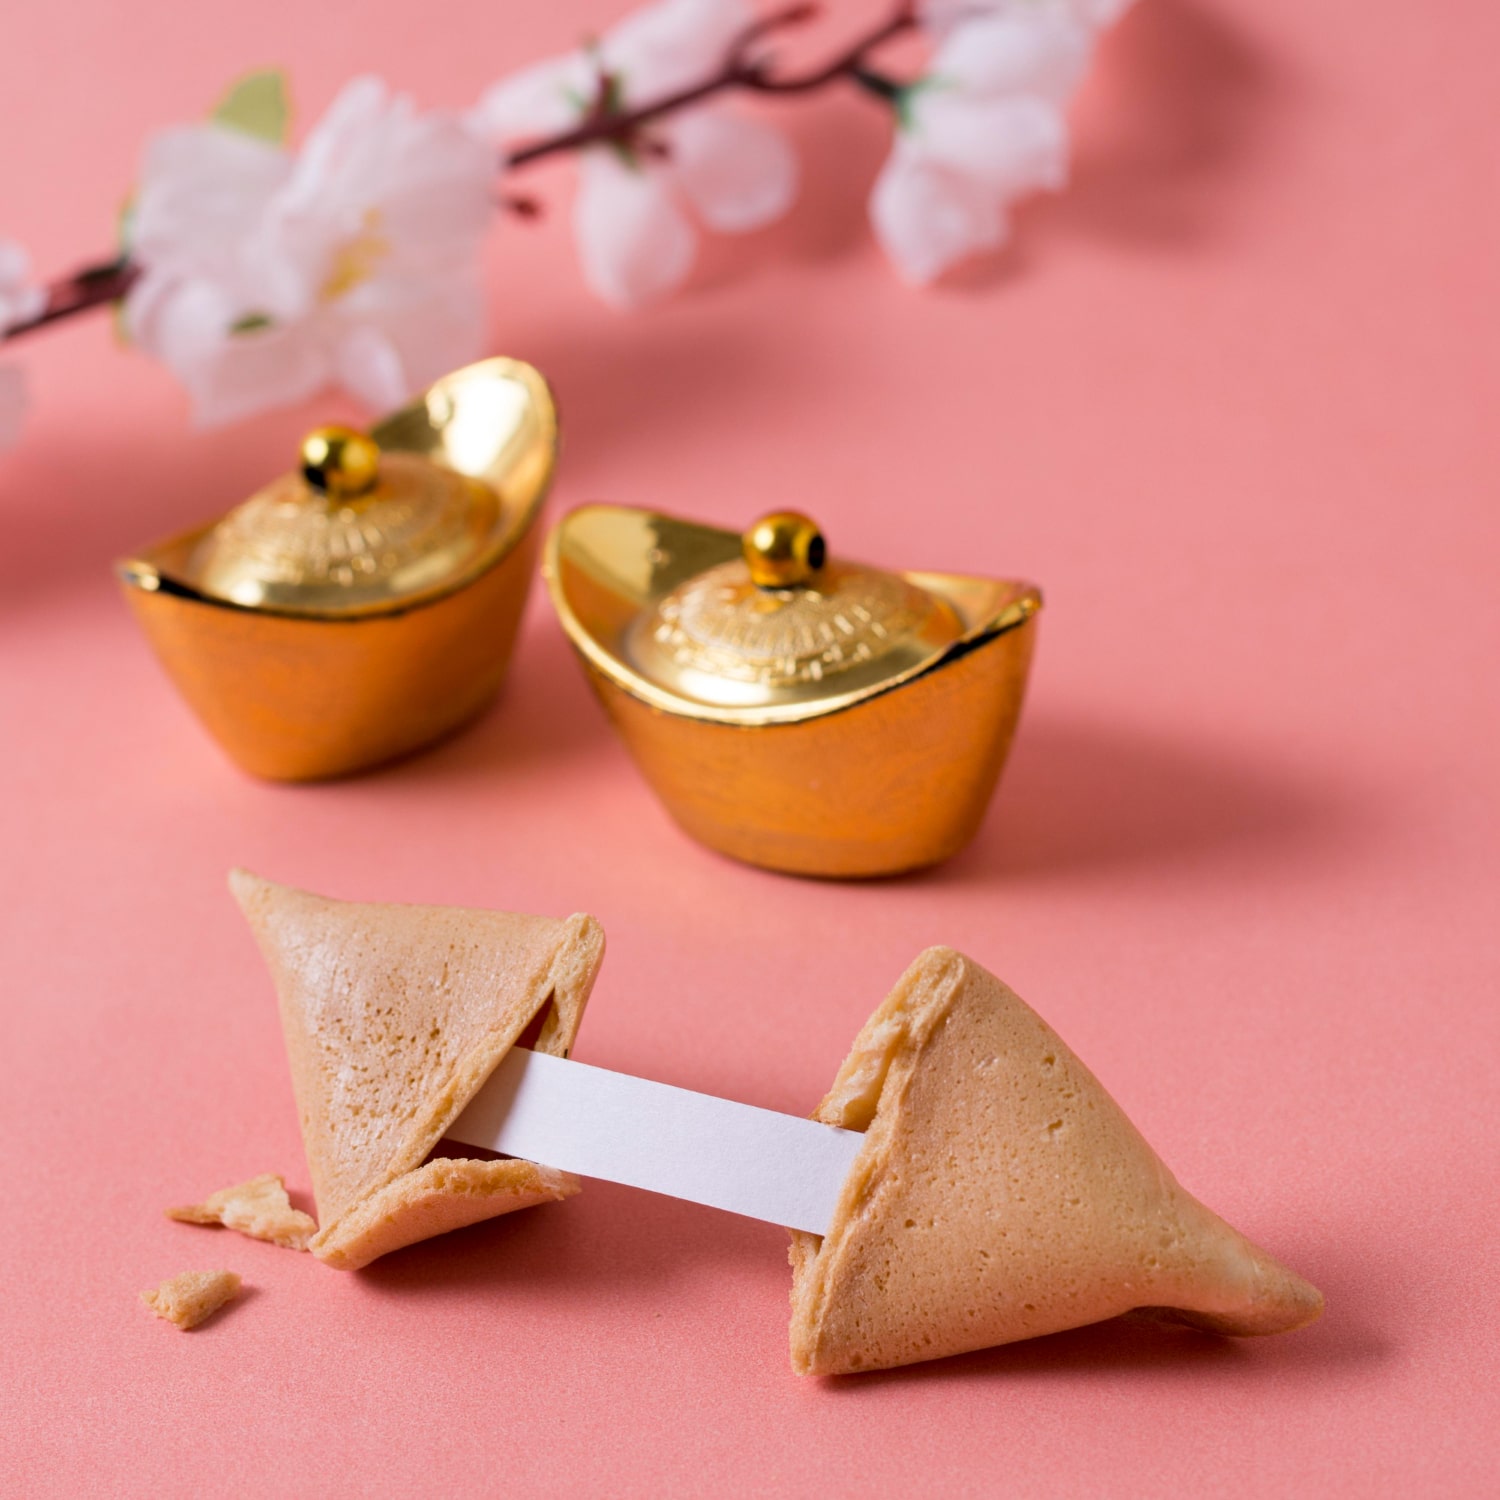 Shimmering gold coins on vibrant pink backdrop add elegance to DIY Dumpling Making Kit for Chinese New Year gifts.